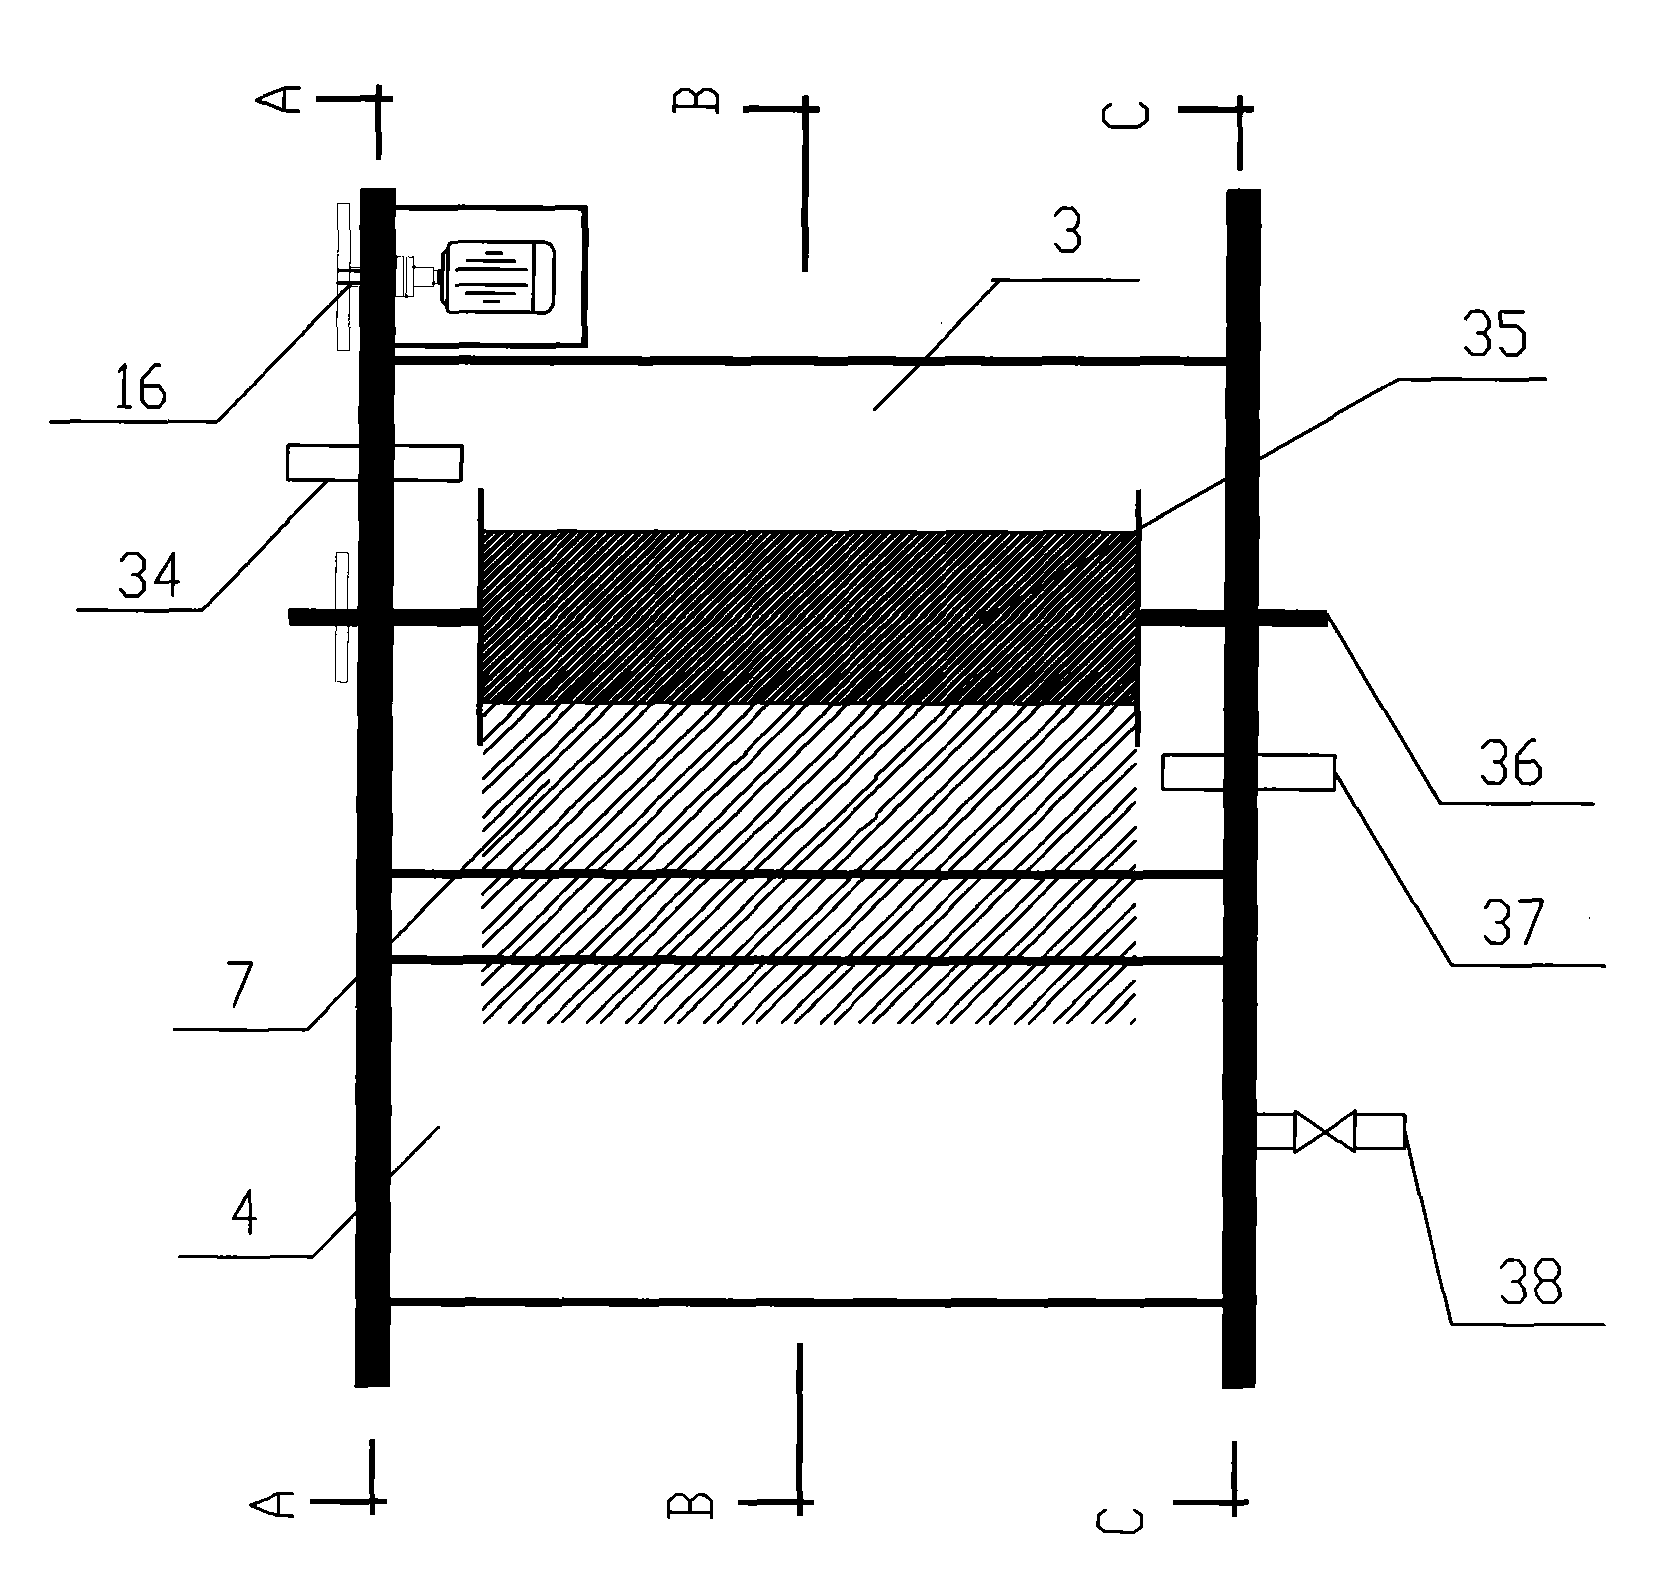 On-line purification equipment for metal machining fluid and purification method thereof